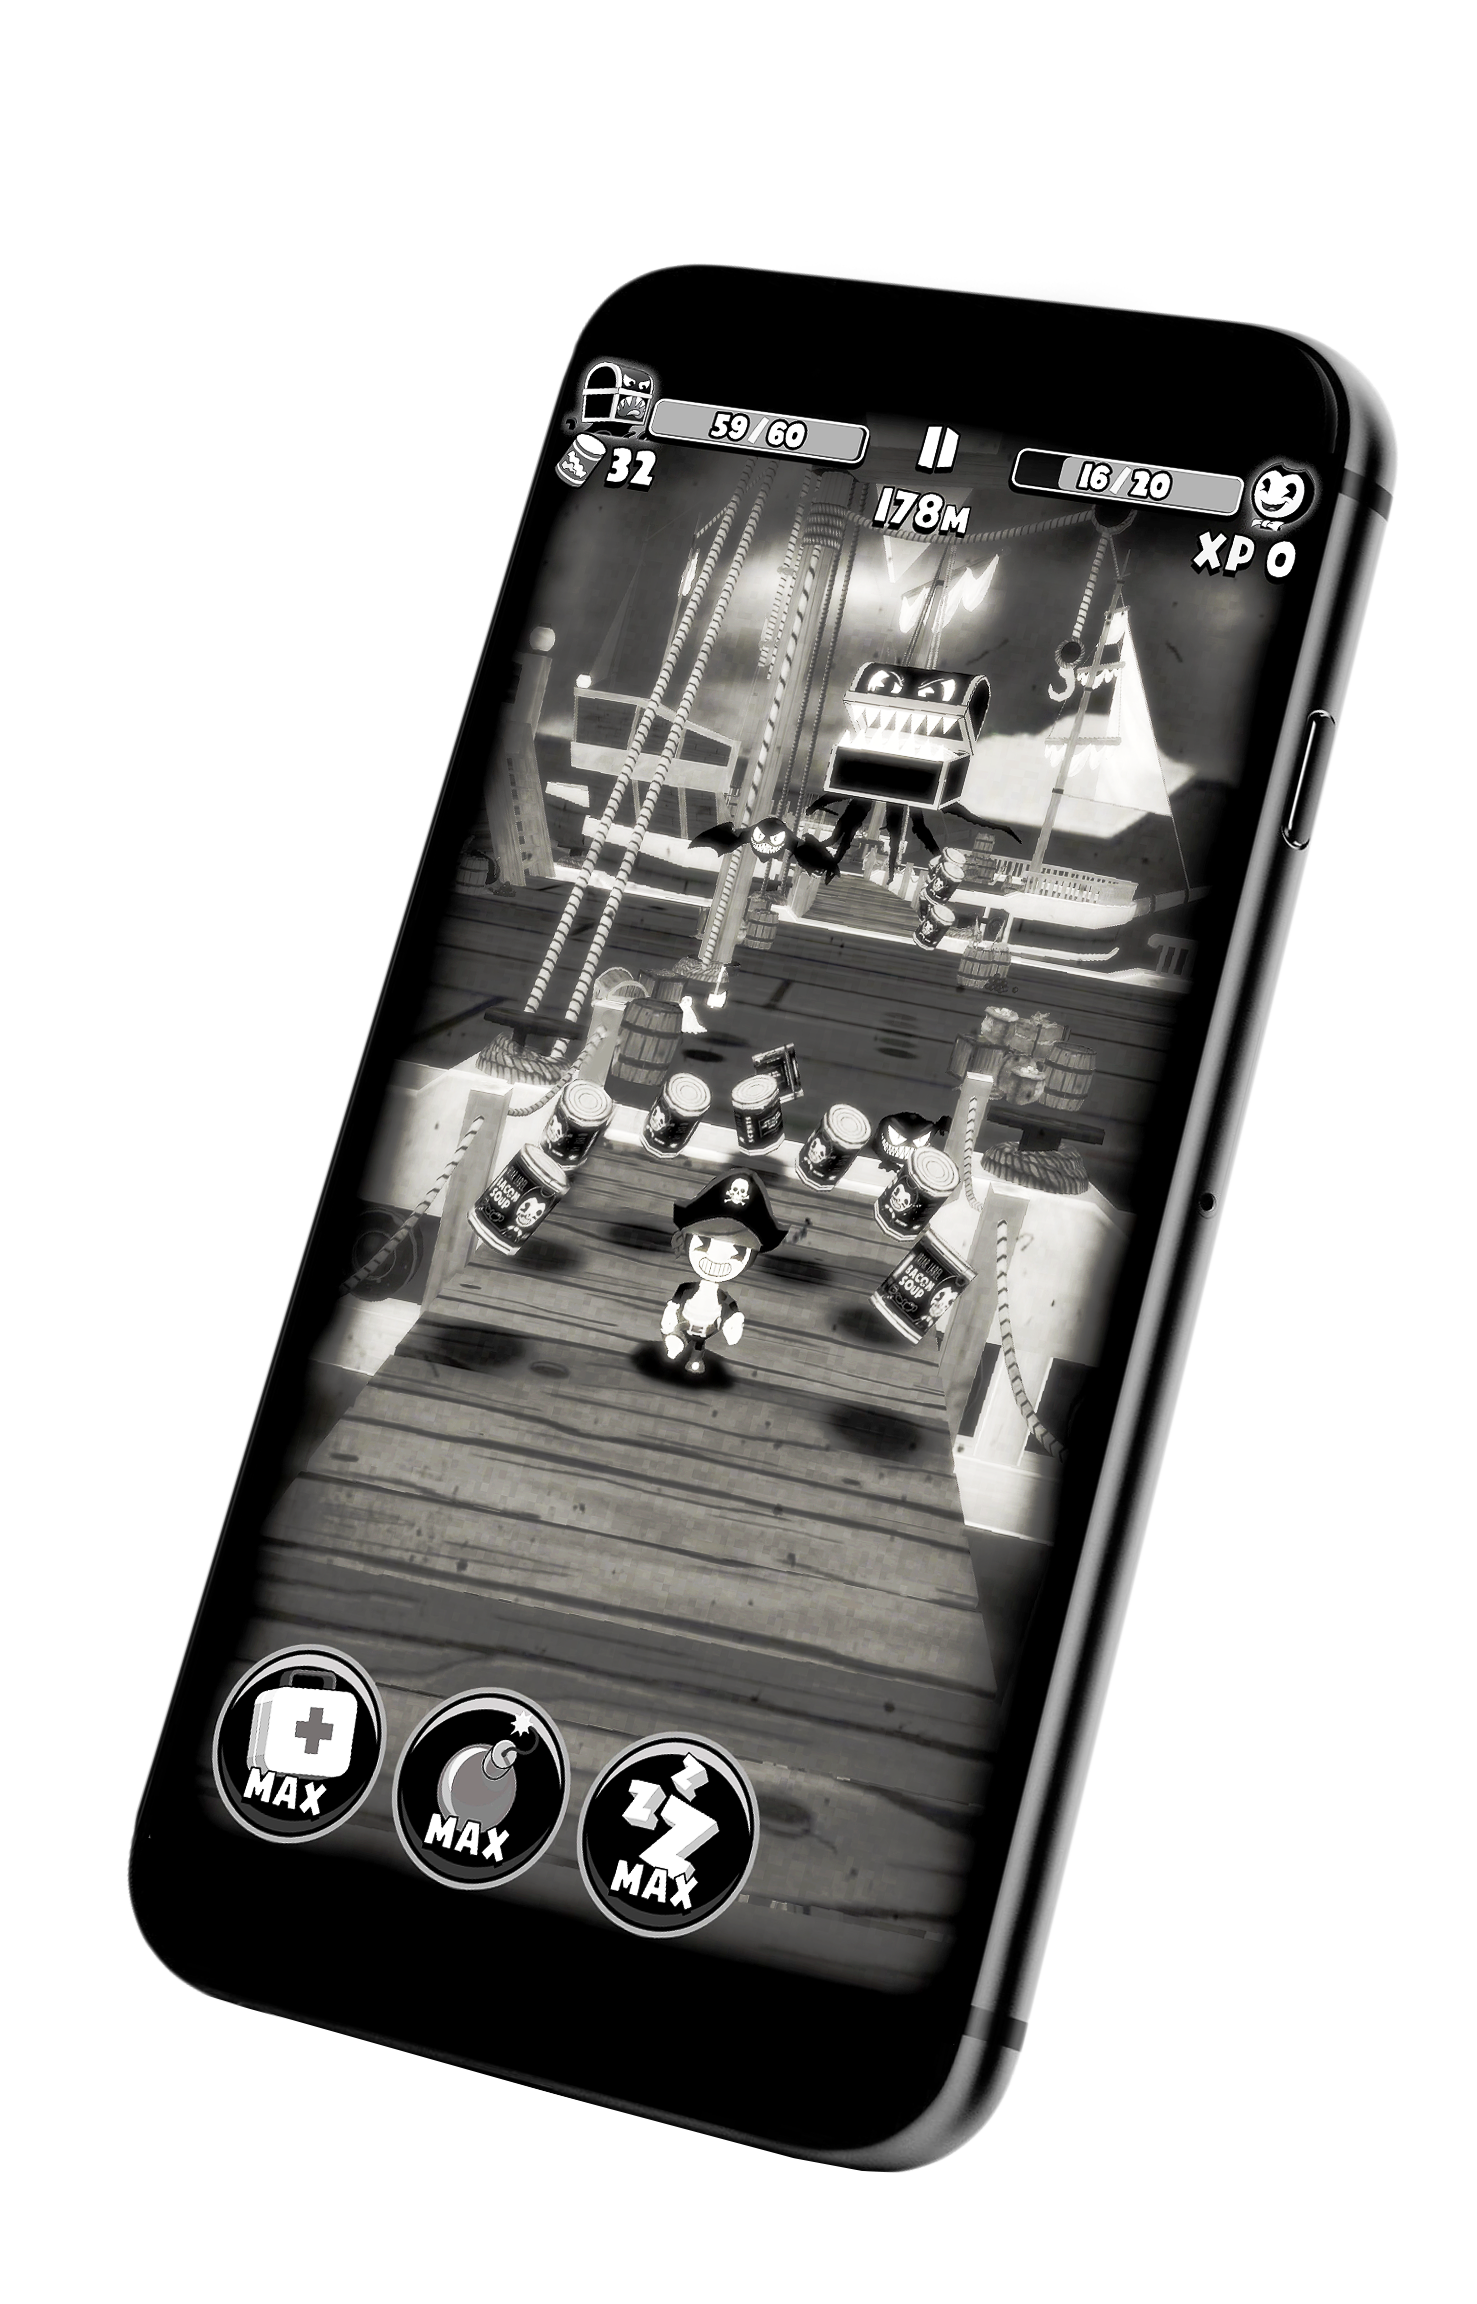 Bendy in Nightmare Run Game for Android - Download